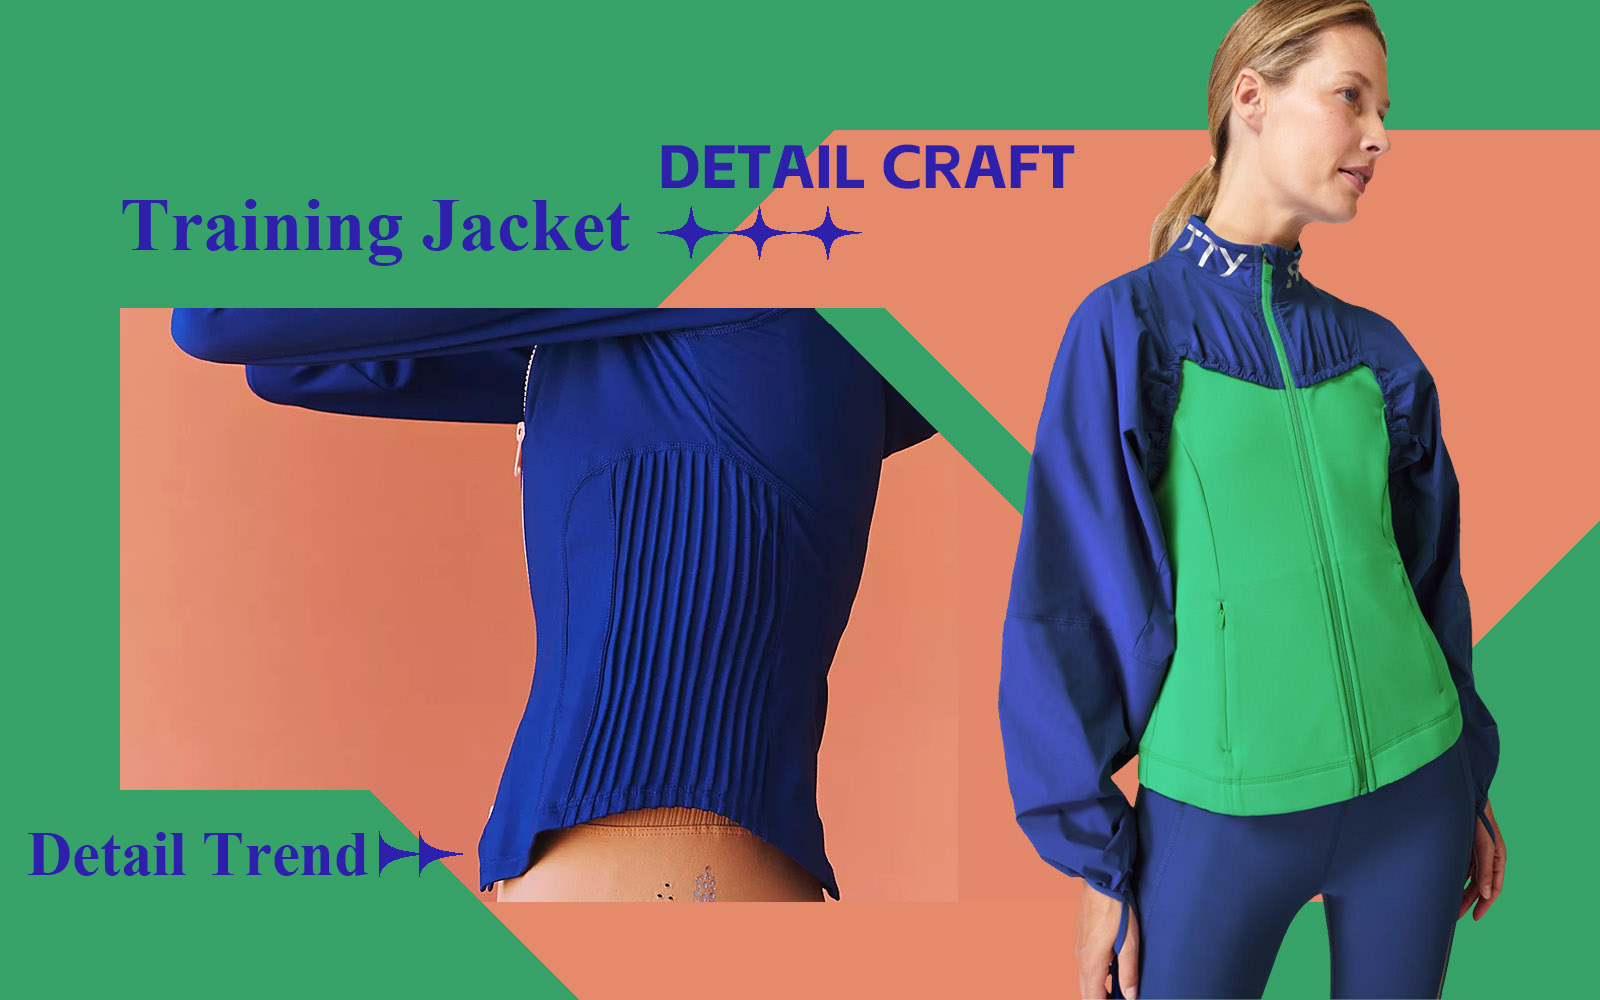 Fashion Curves -- The Detail & Craft Trend for Women's Training Jacket